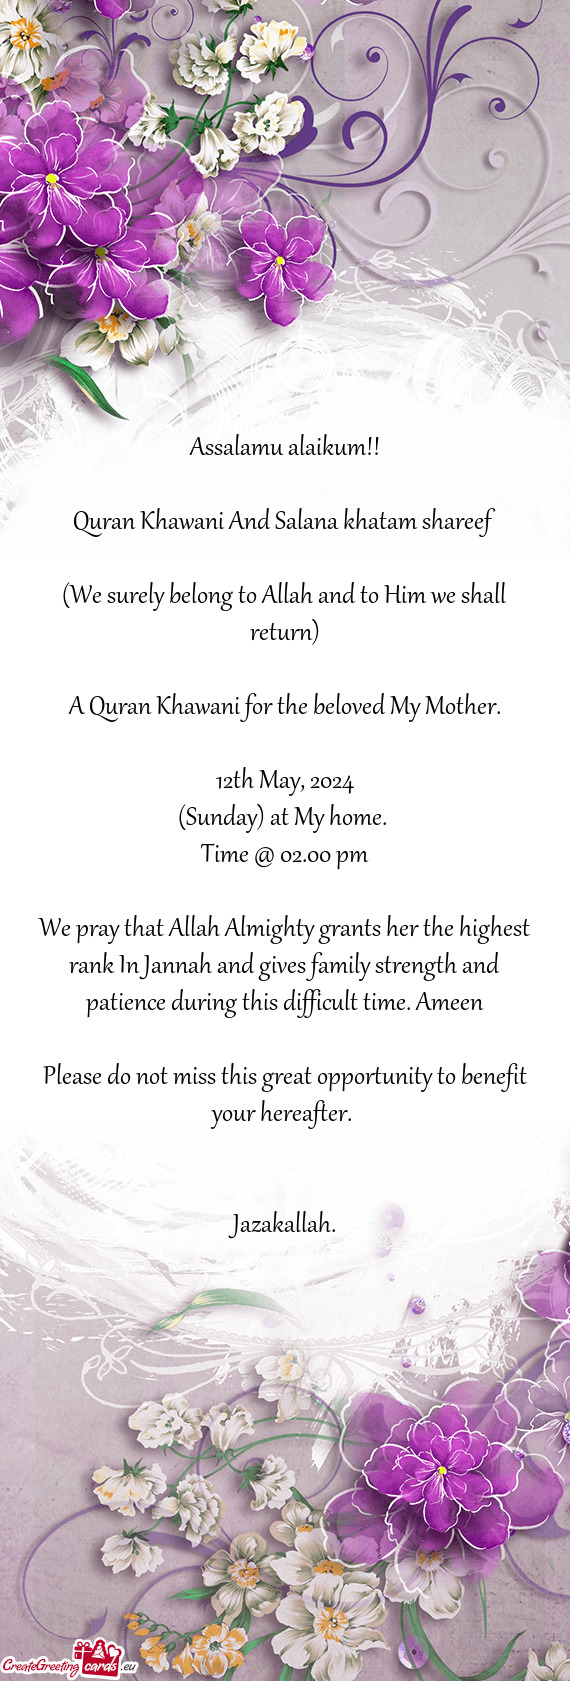 A Quran Khawani for the beloved My Mother